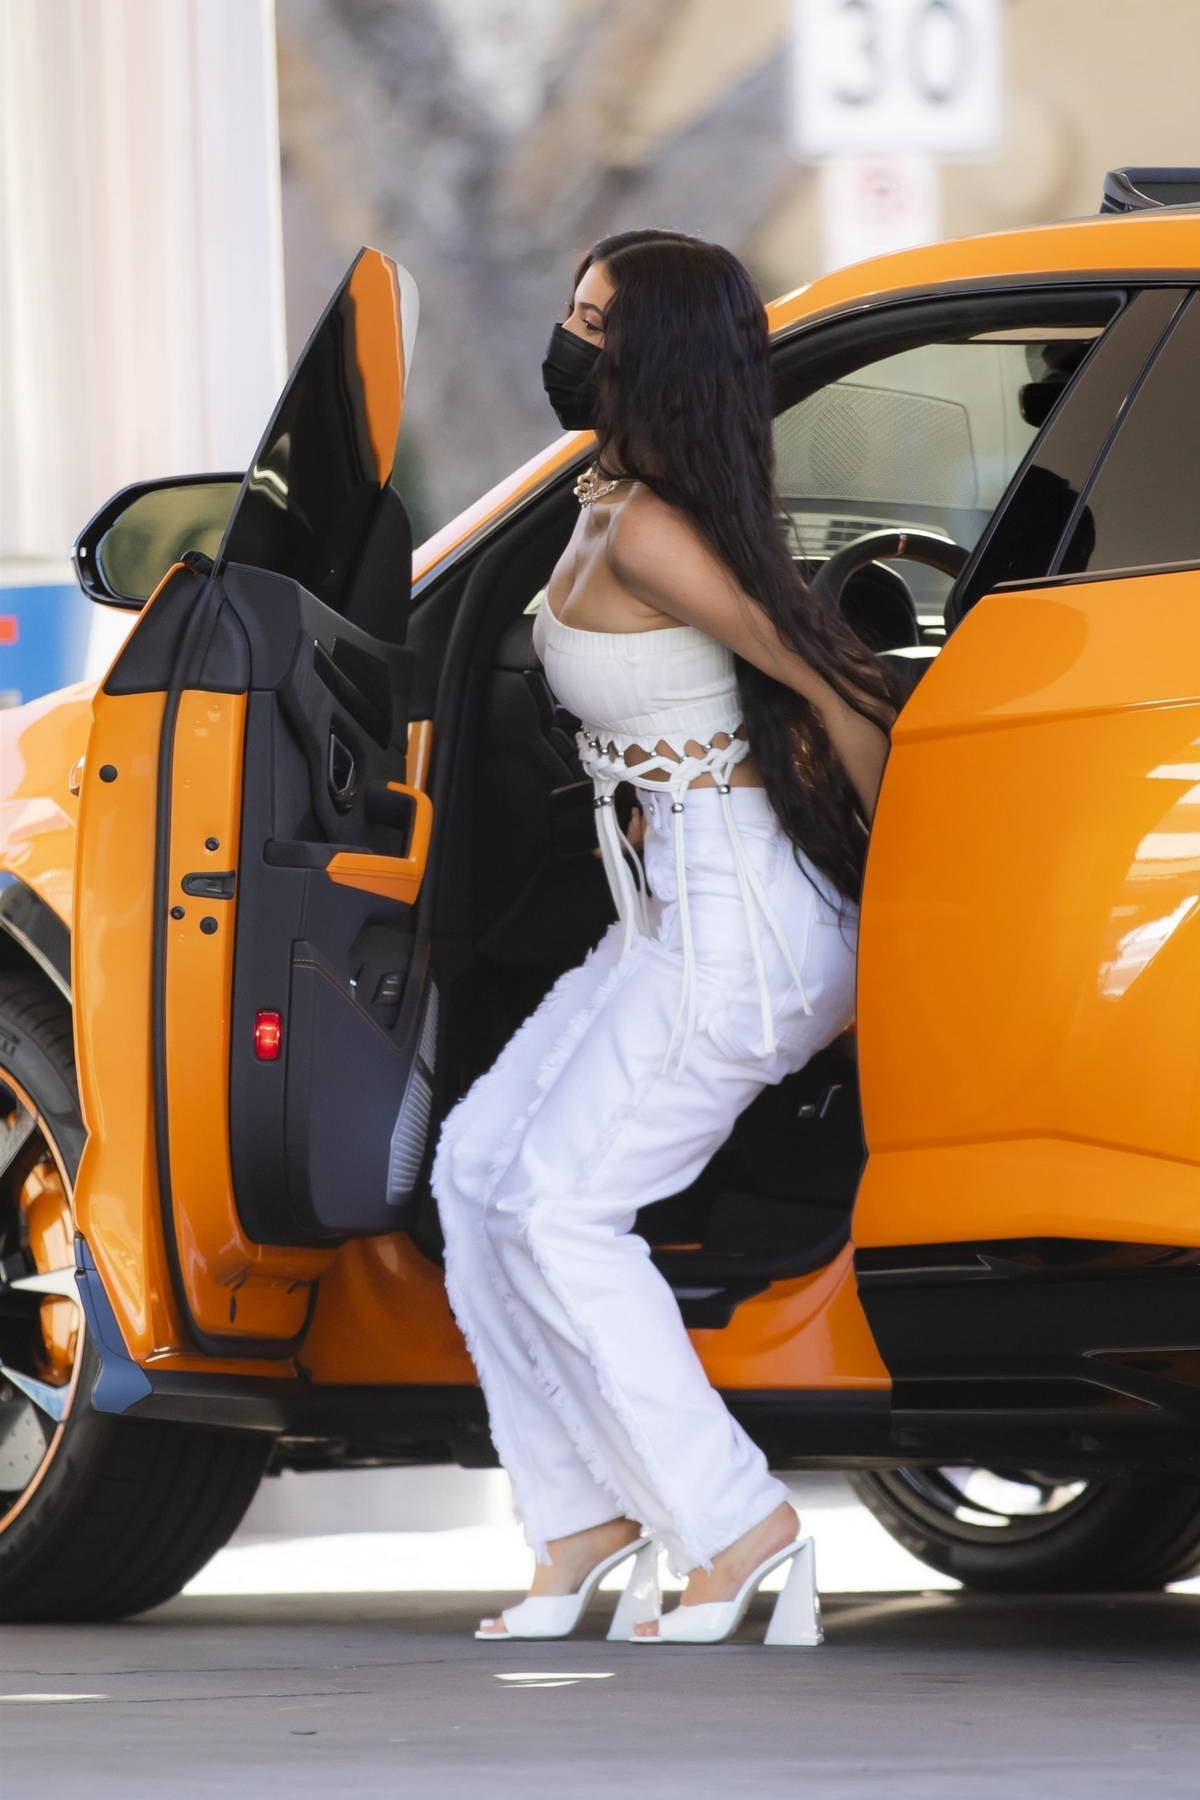 Kylie Jenner Getting Out of a Lamborghini Aventador Roadster March 11, 2017  – Star Style